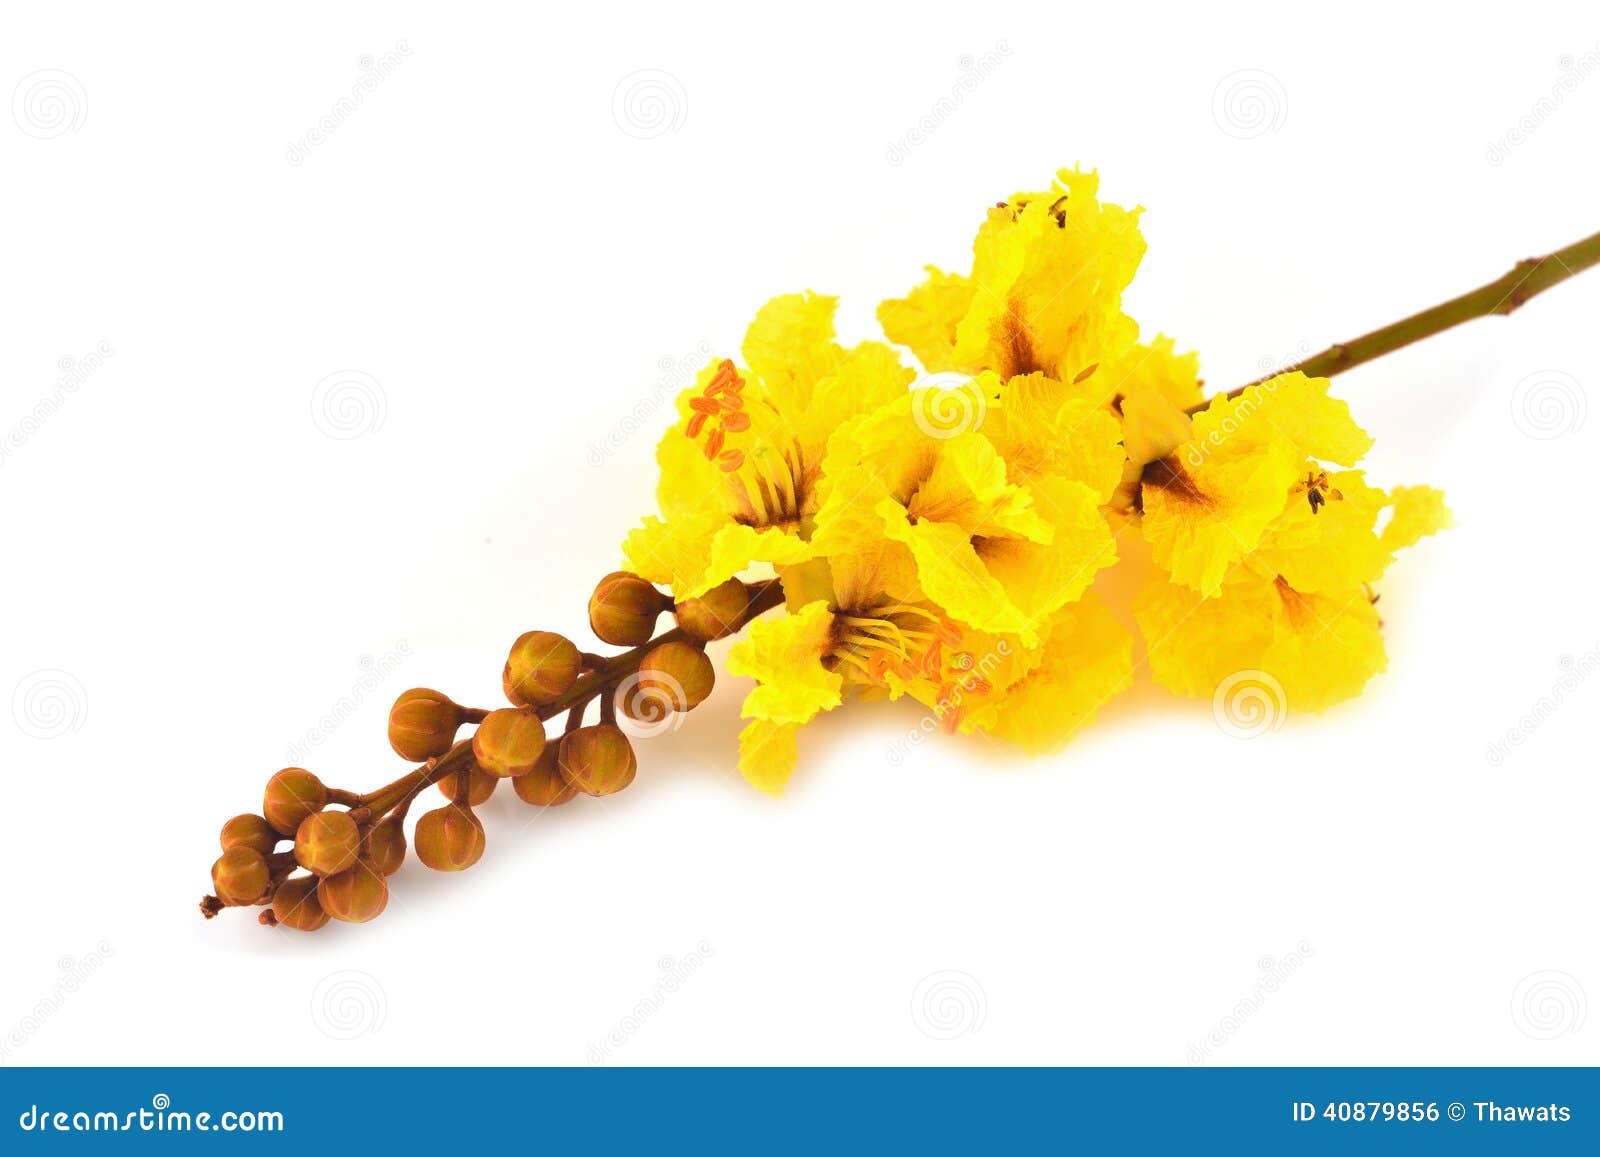 Yellow flower stock photo. Image of outdoor, natural - 40879856